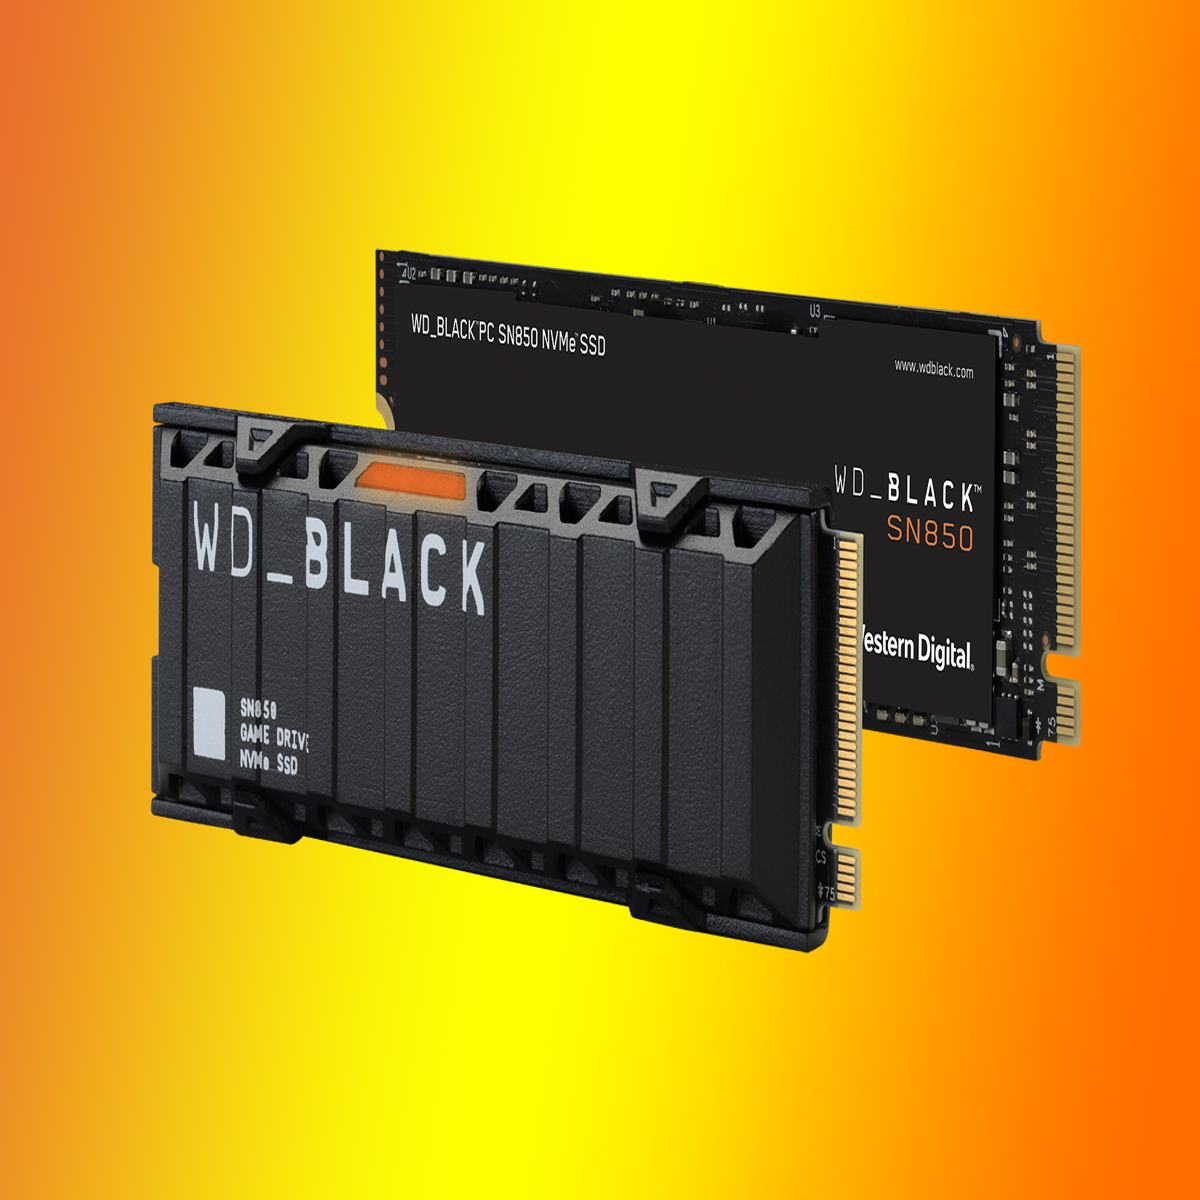 WD Black PS5 SSD Now Available With $125 Discount